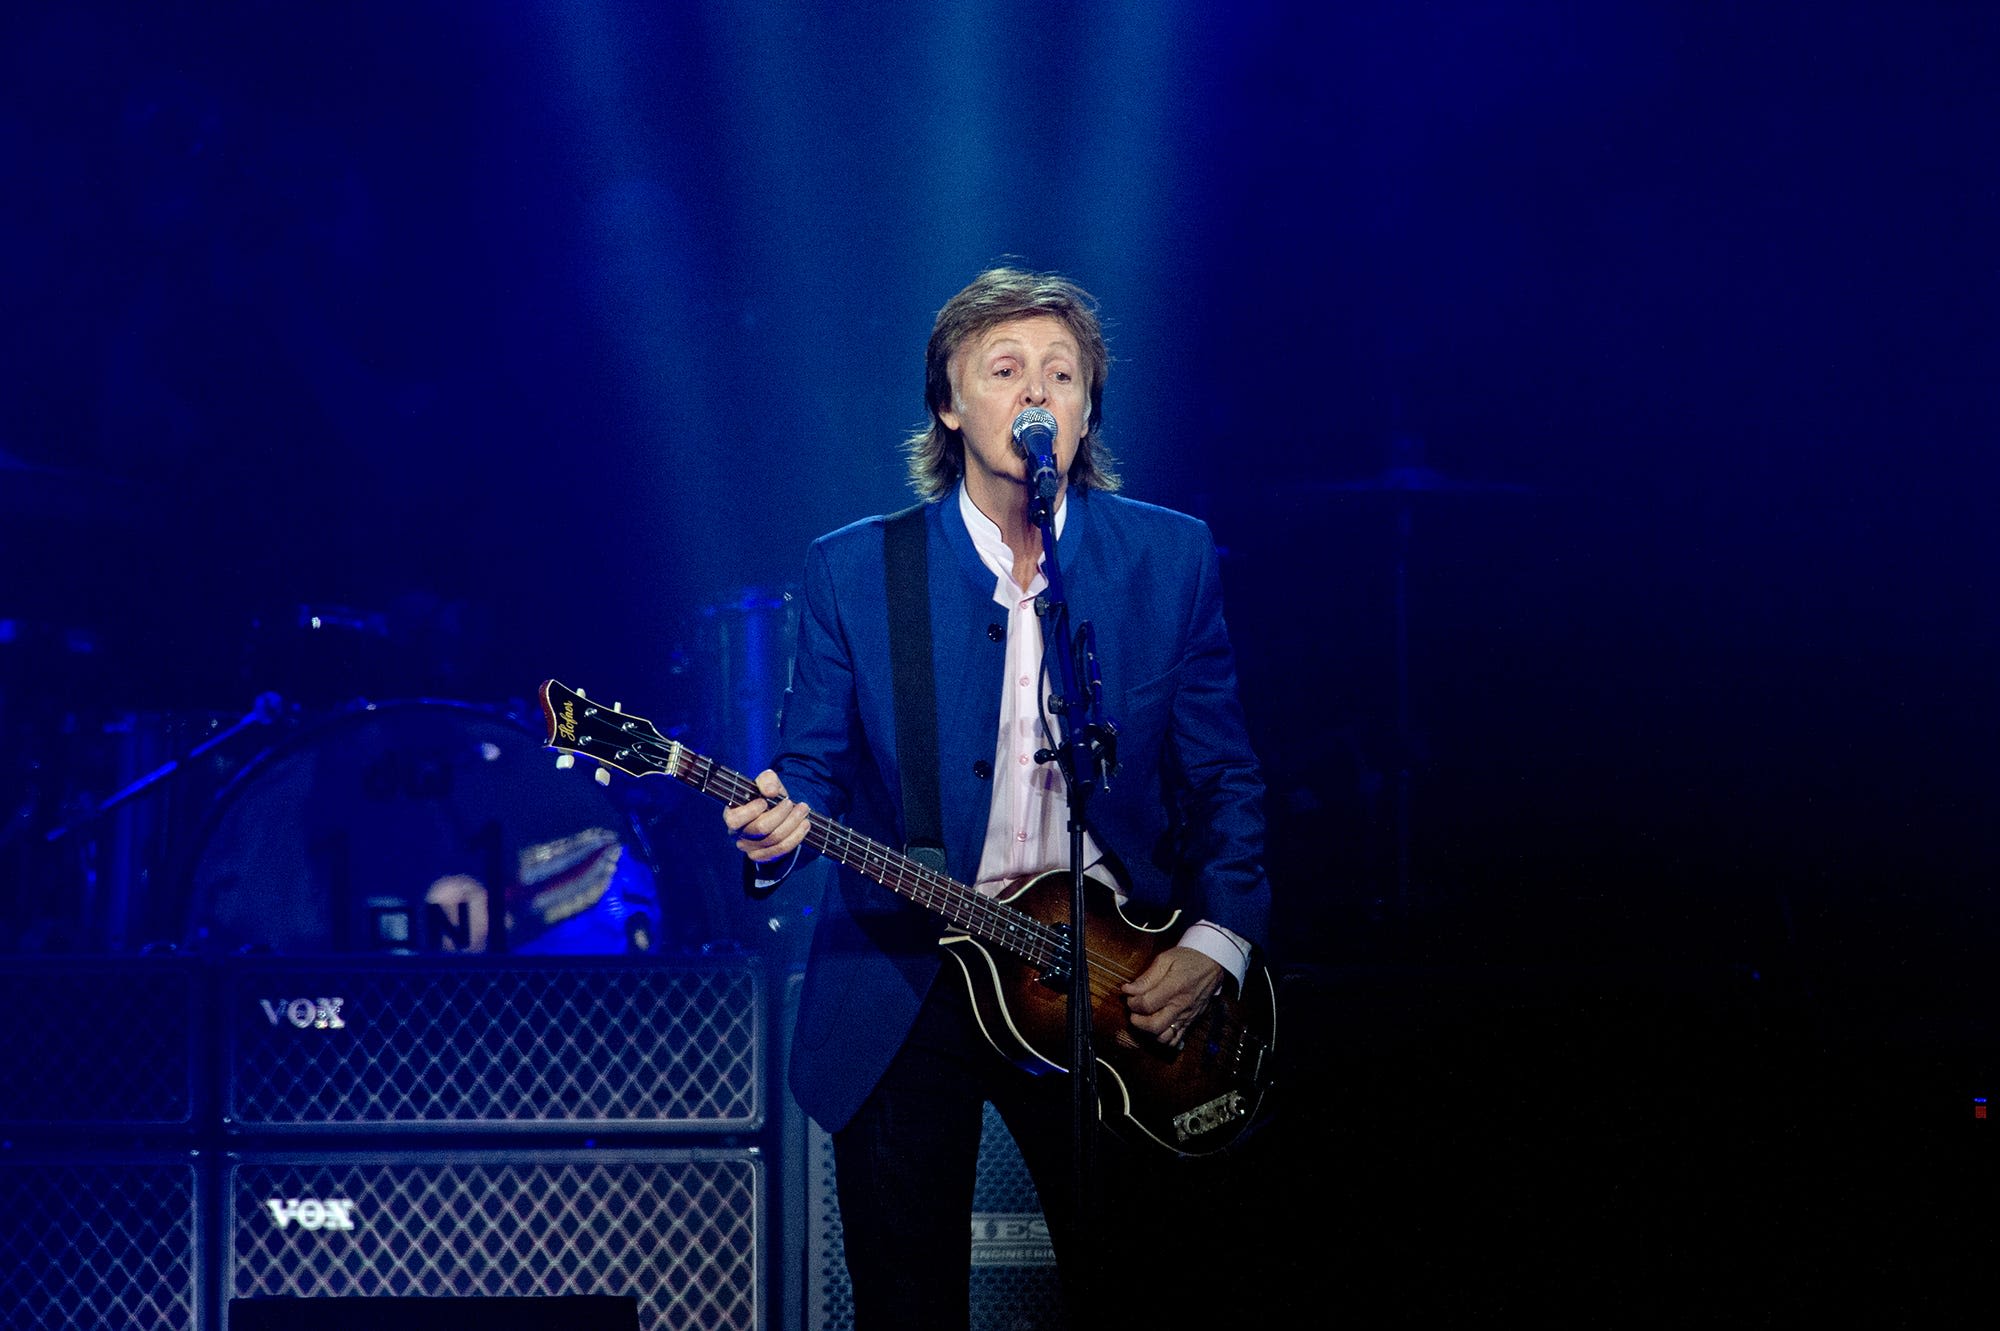 Cincinnati launches 'Get Paul to Music Hall' campaign to lure Paul McCartney to town